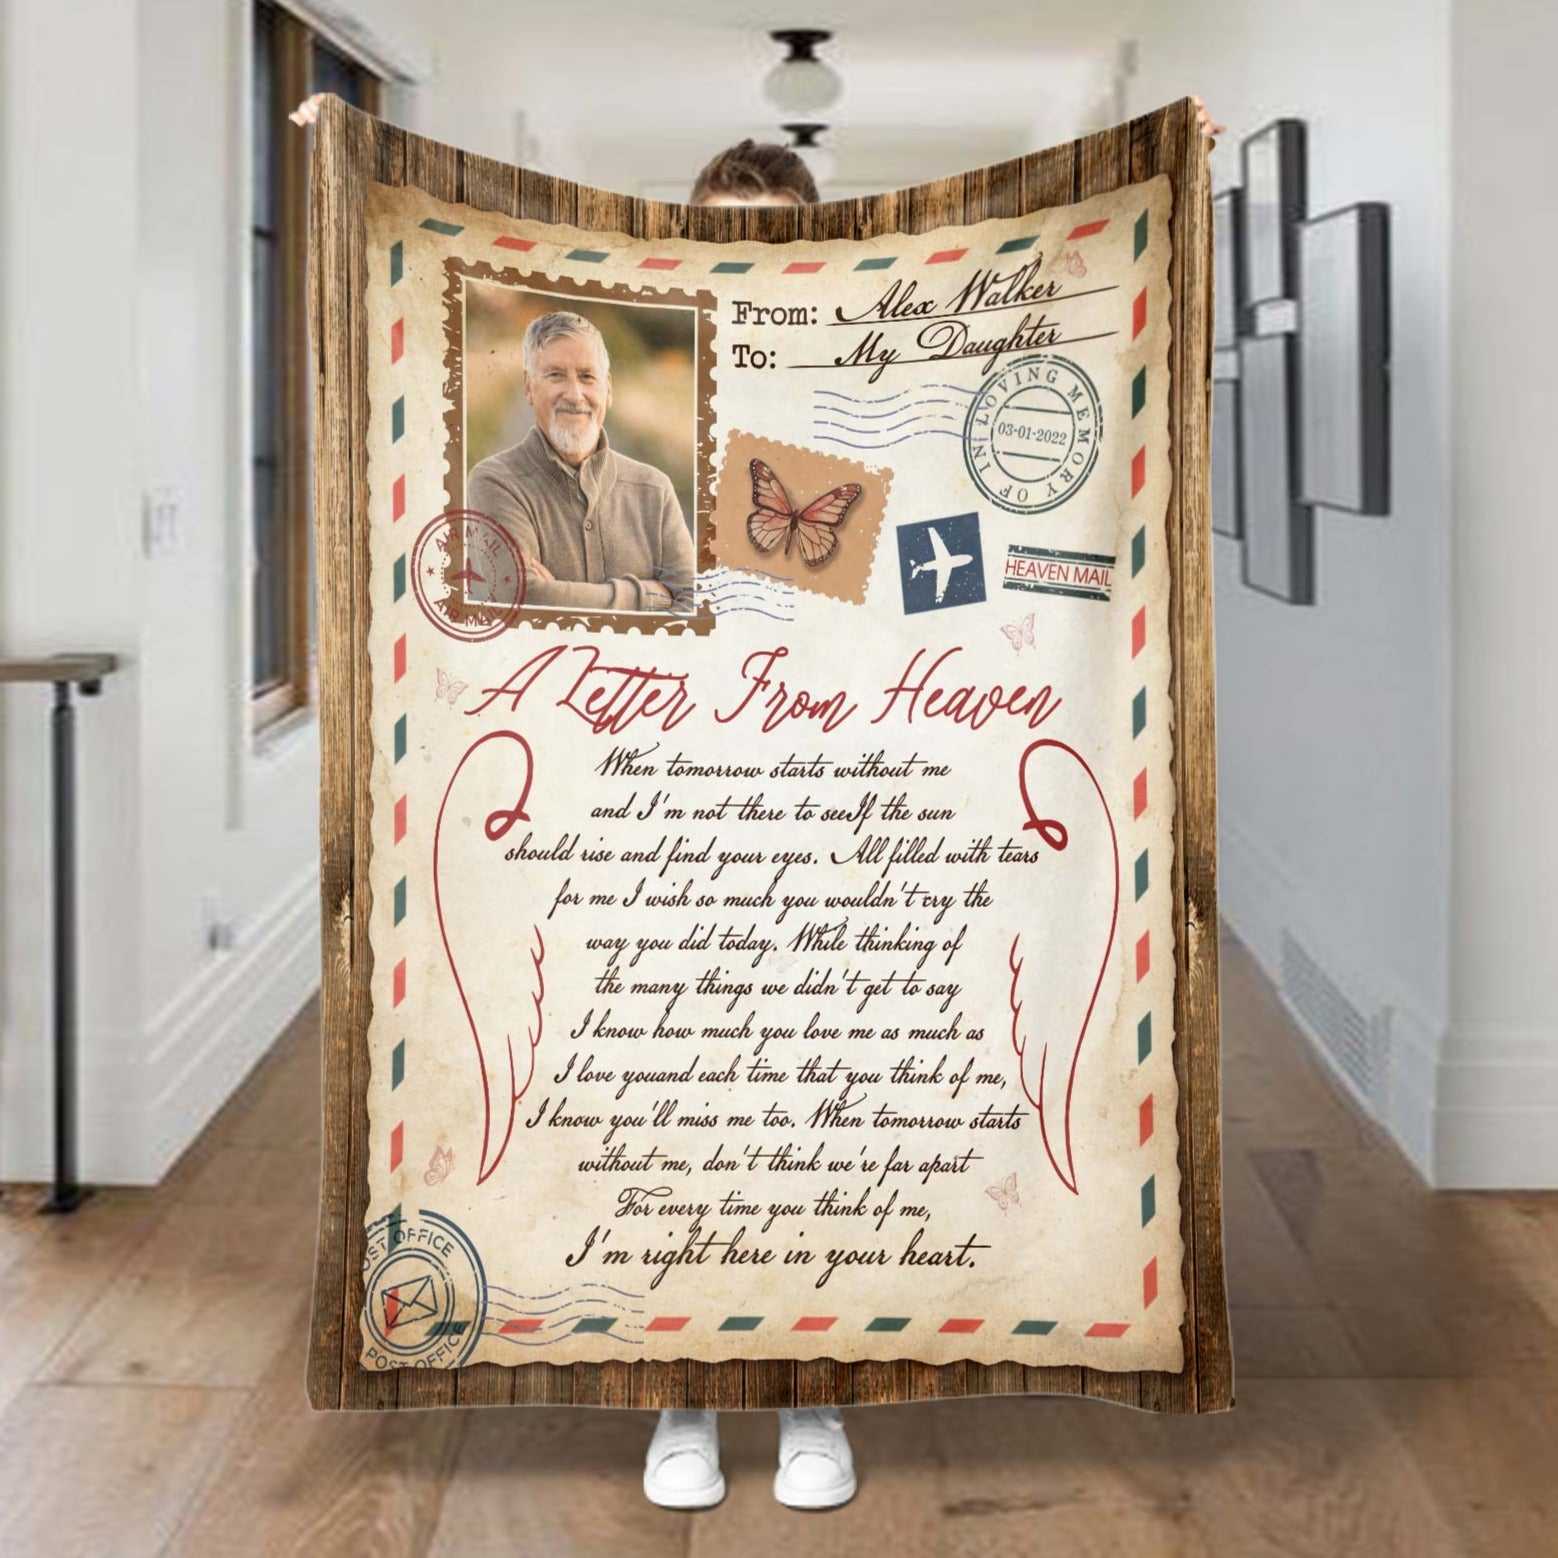 Personalized In Memory Blanket For Loss Of Father, Letter From Heaven, Funeral Throws Memorial Blankets For Dad, Personalized Photo Blanket, Condolence Blanket